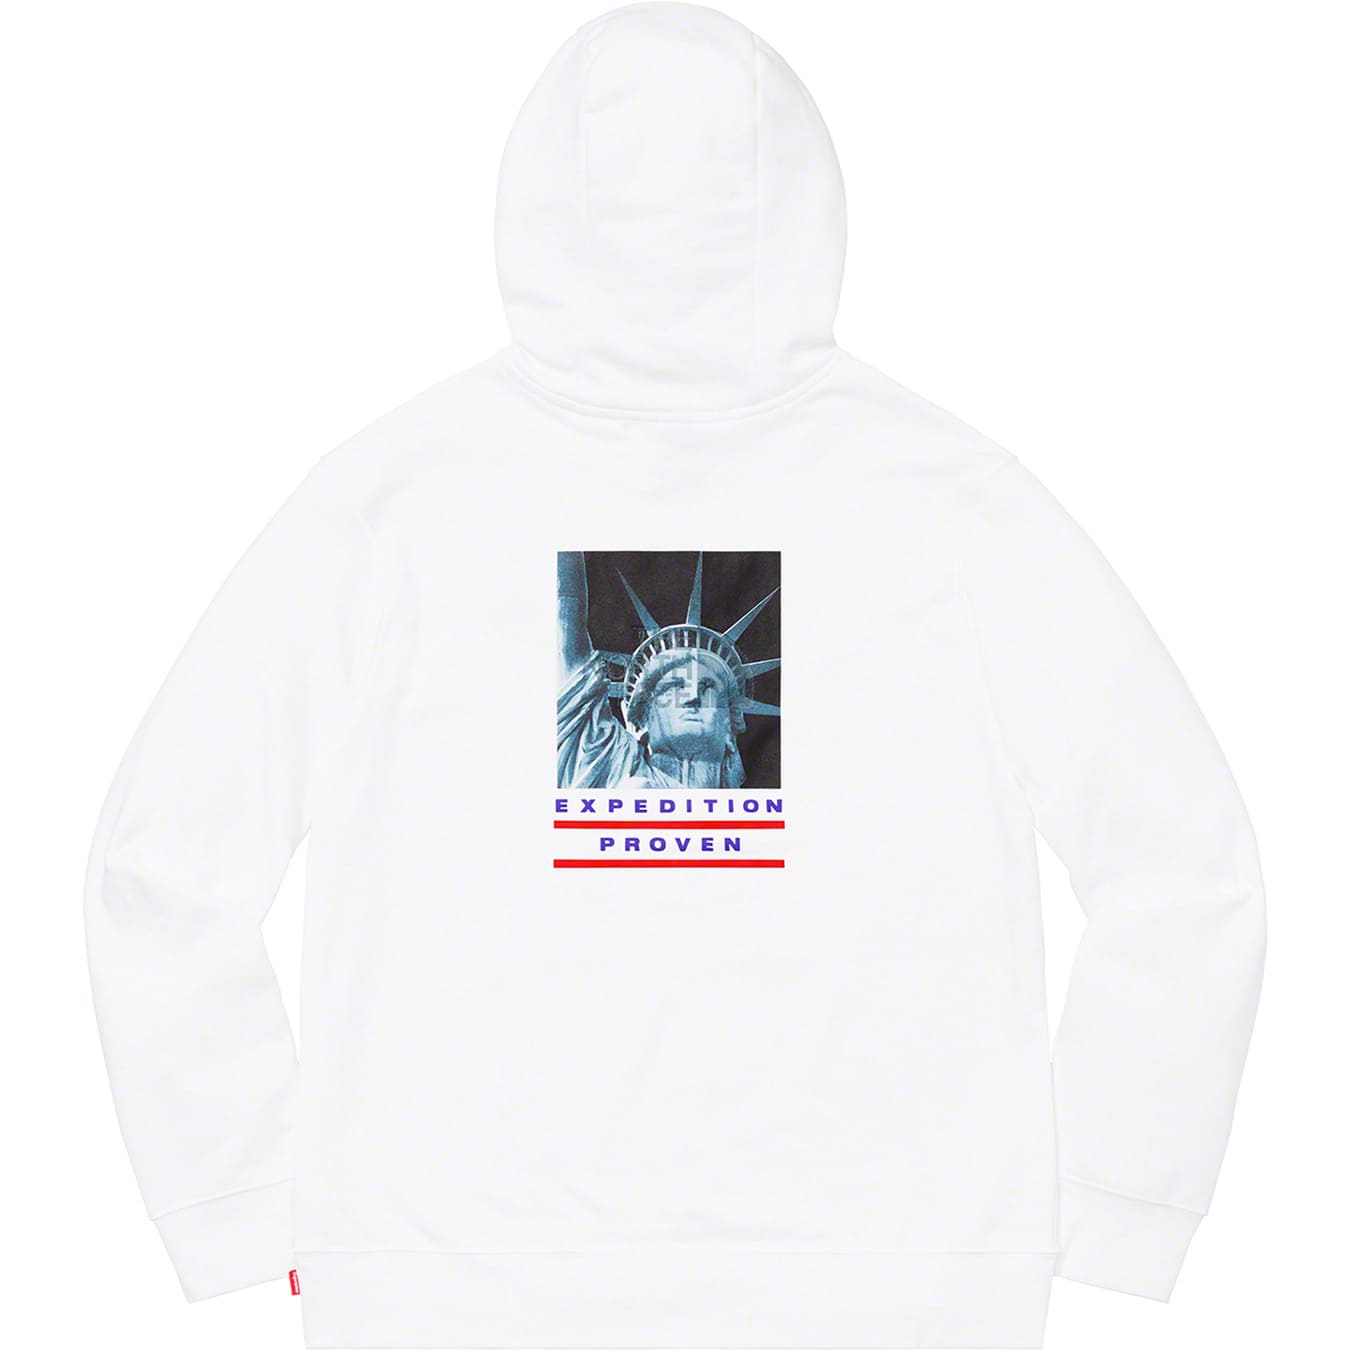 Supreme®/The North Face® Statue of Liberty Hooded Sweatshirt